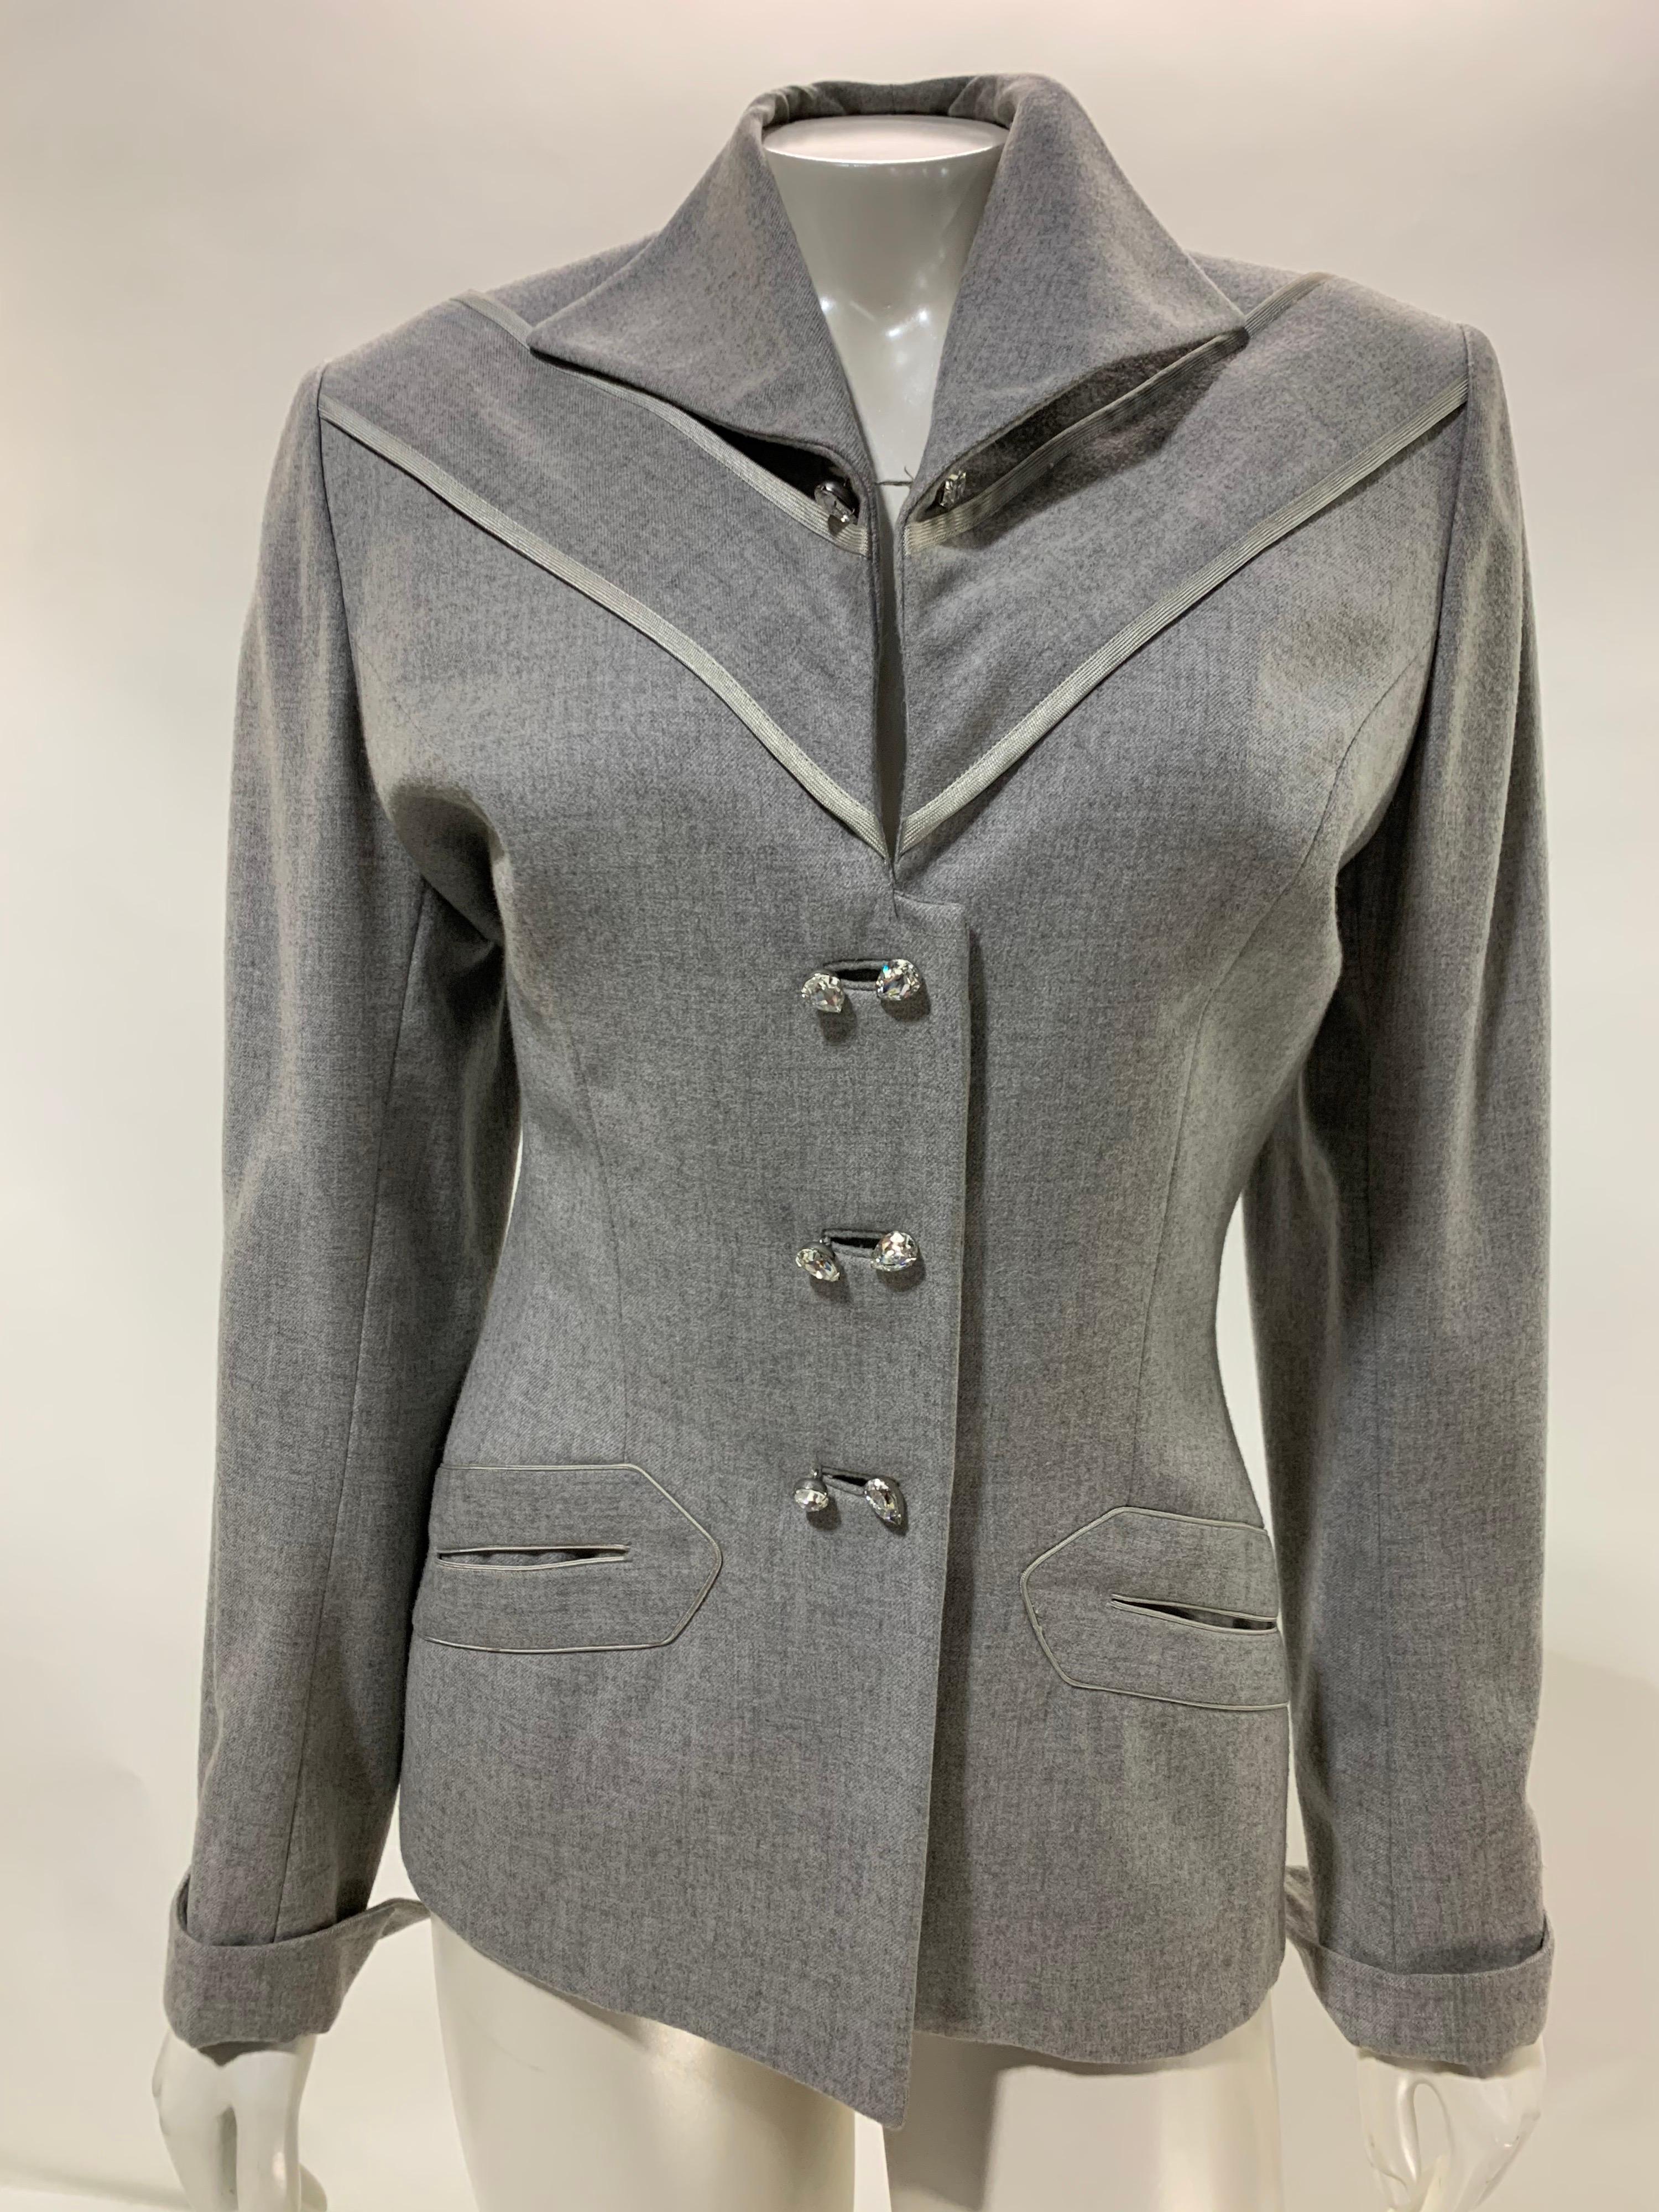 1950s Lilli Ann Gray Heathered Wool Jacket w/ Jeweled Buttons & Satin Piping In Excellent Condition For Sale In Gresham, OR